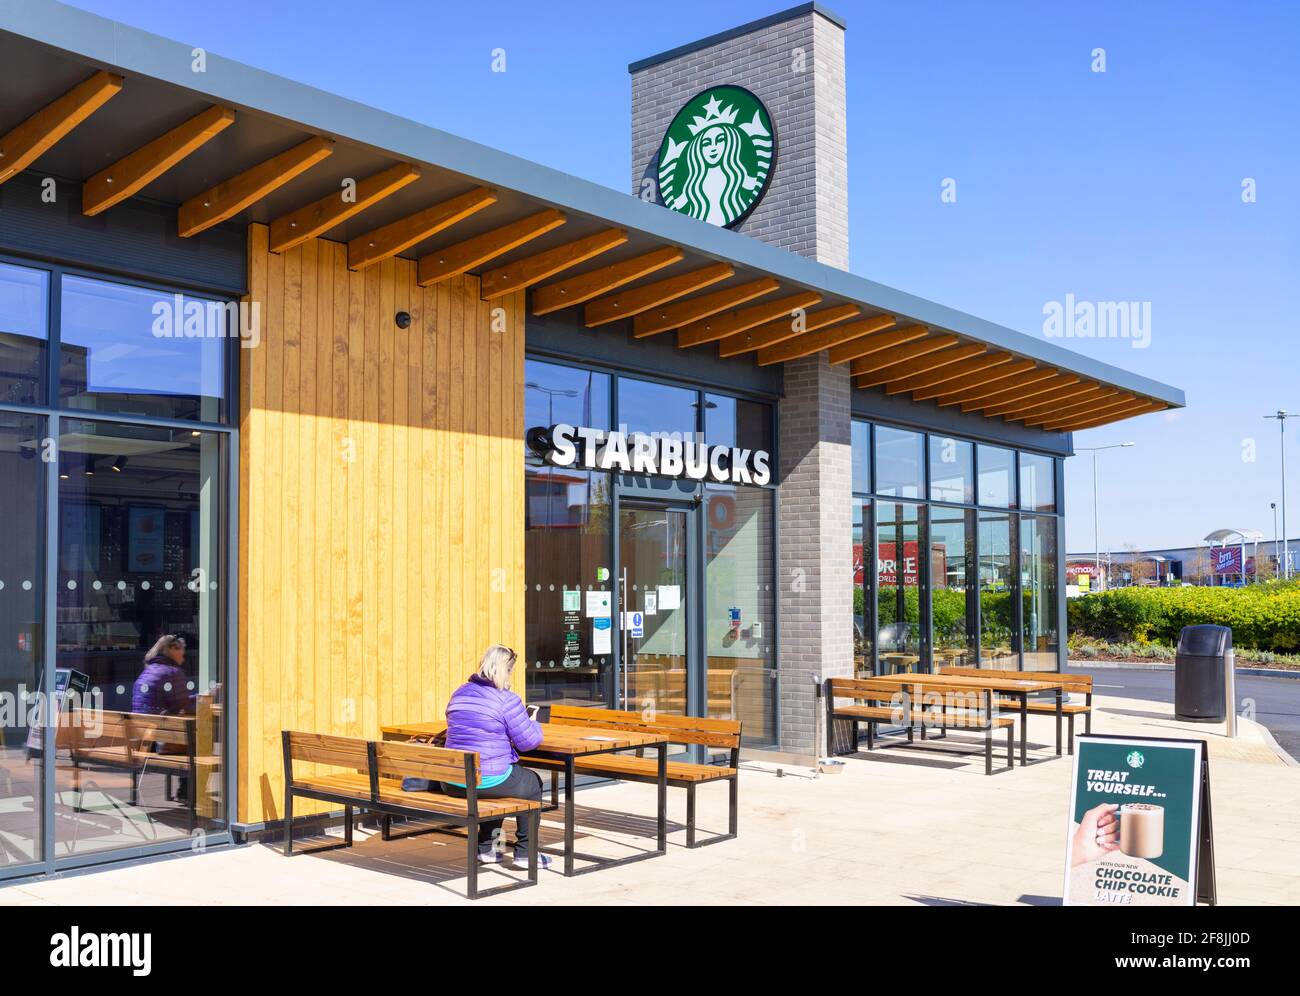 Starbucks cafe and drive-thru Woman sat with takeaway coffee Victoria retail park Netherfield Nottingham East mIdlands England GB UK Europe Stock Photo